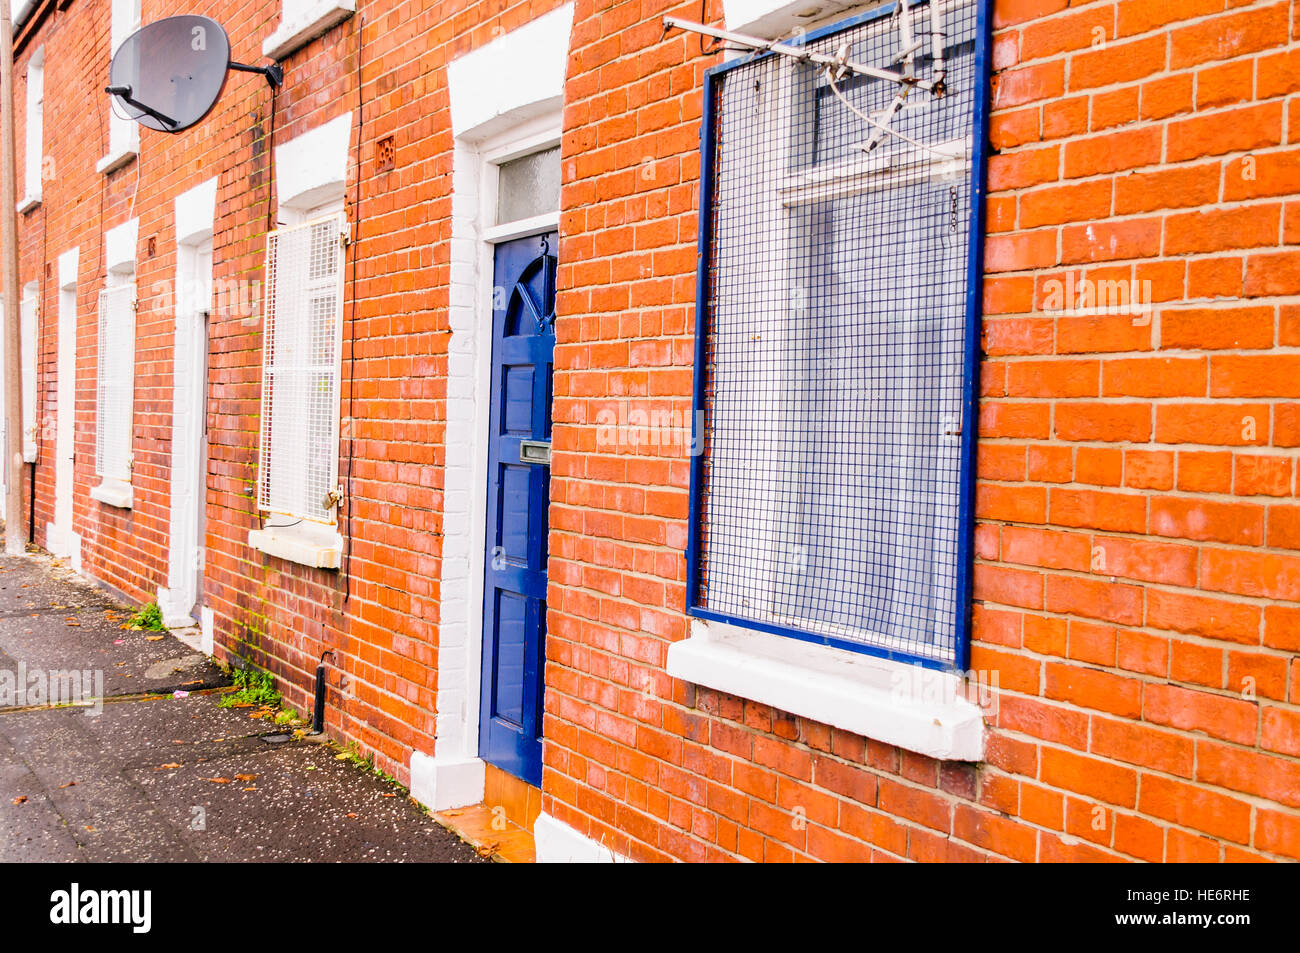 Steel grilles on the windows of houses, to protect against vandalism, in an interface area of Belfast. Stock Photo